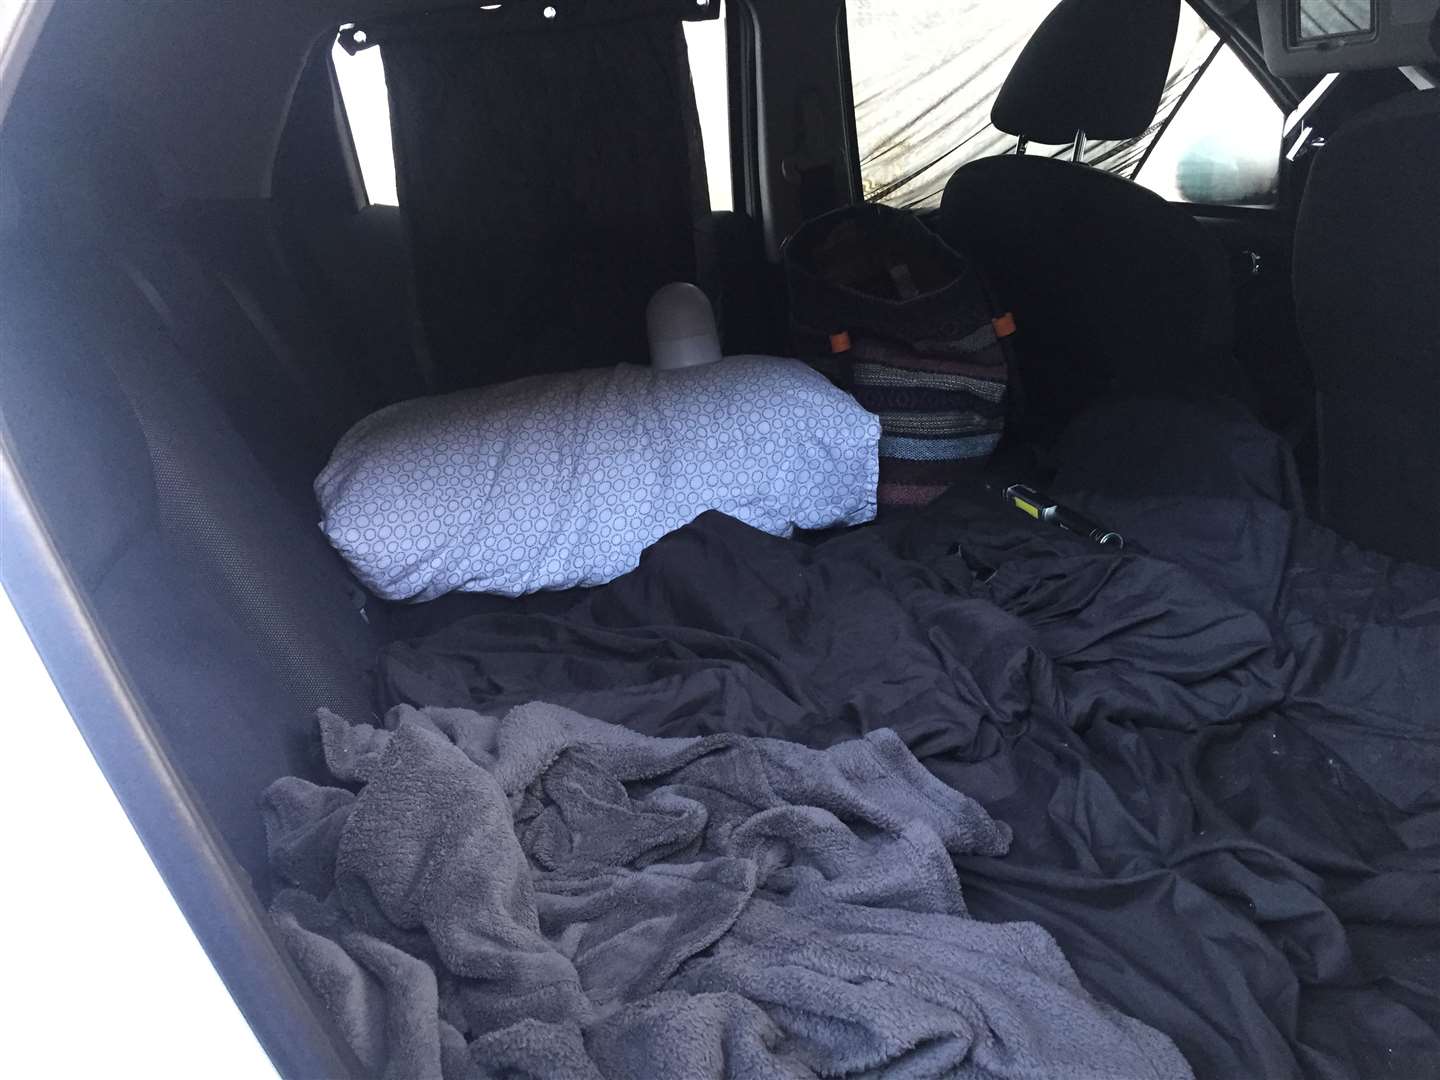 An air bed has been wedged into the back seat of a car